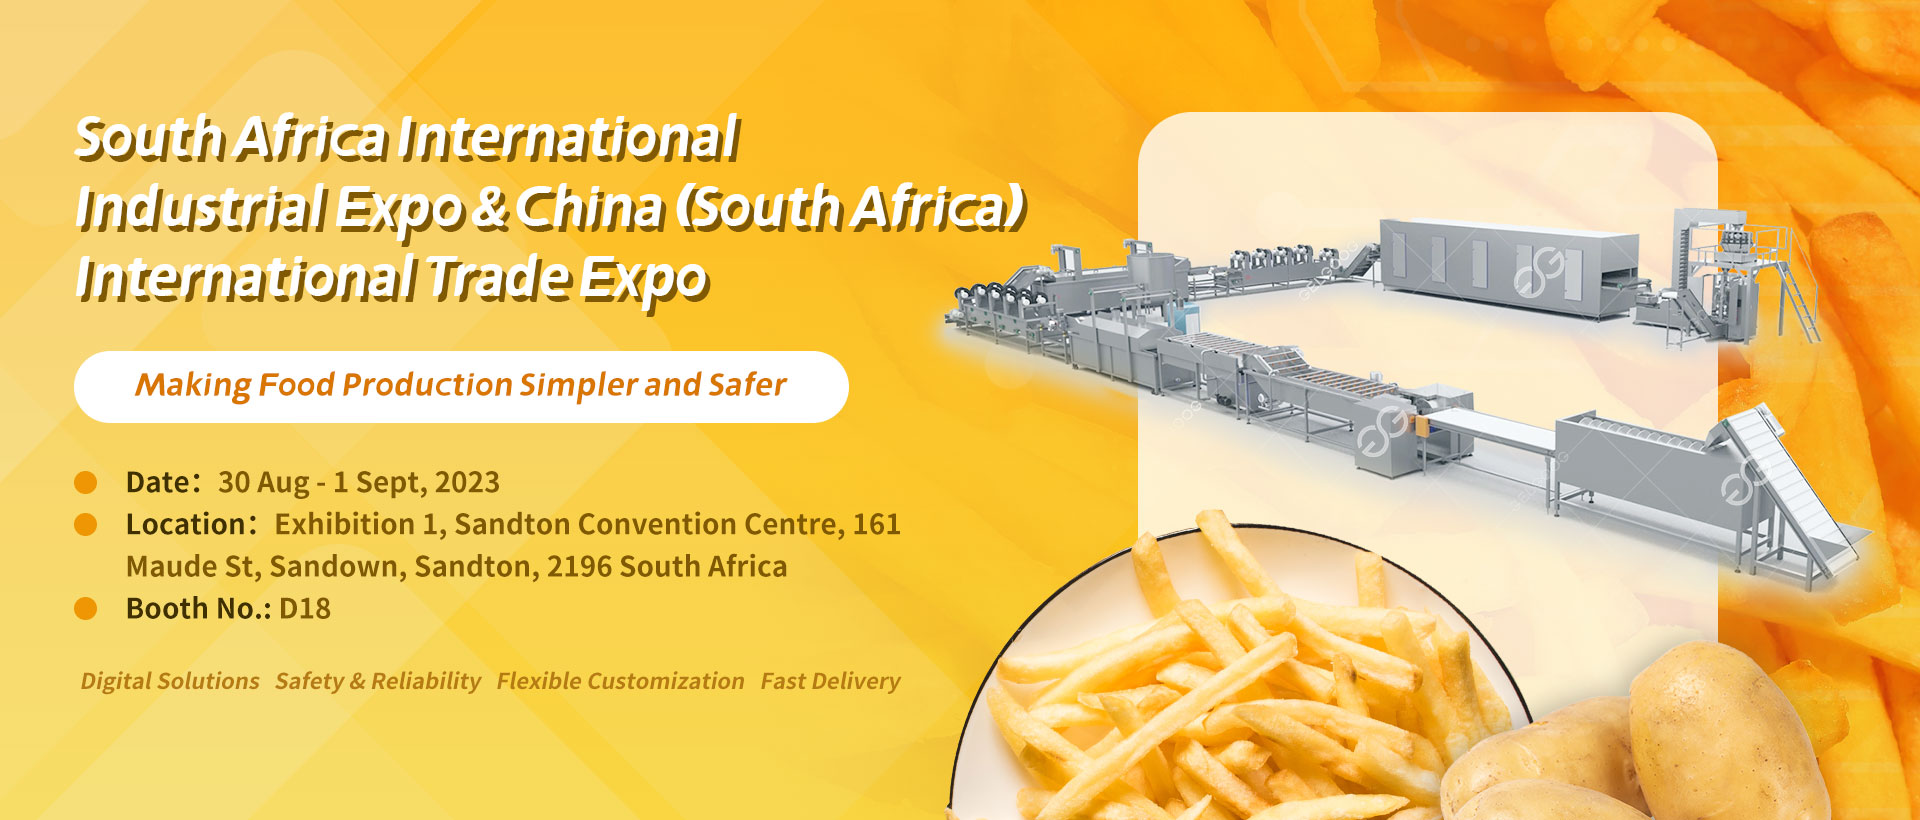 South Africa Exhibition